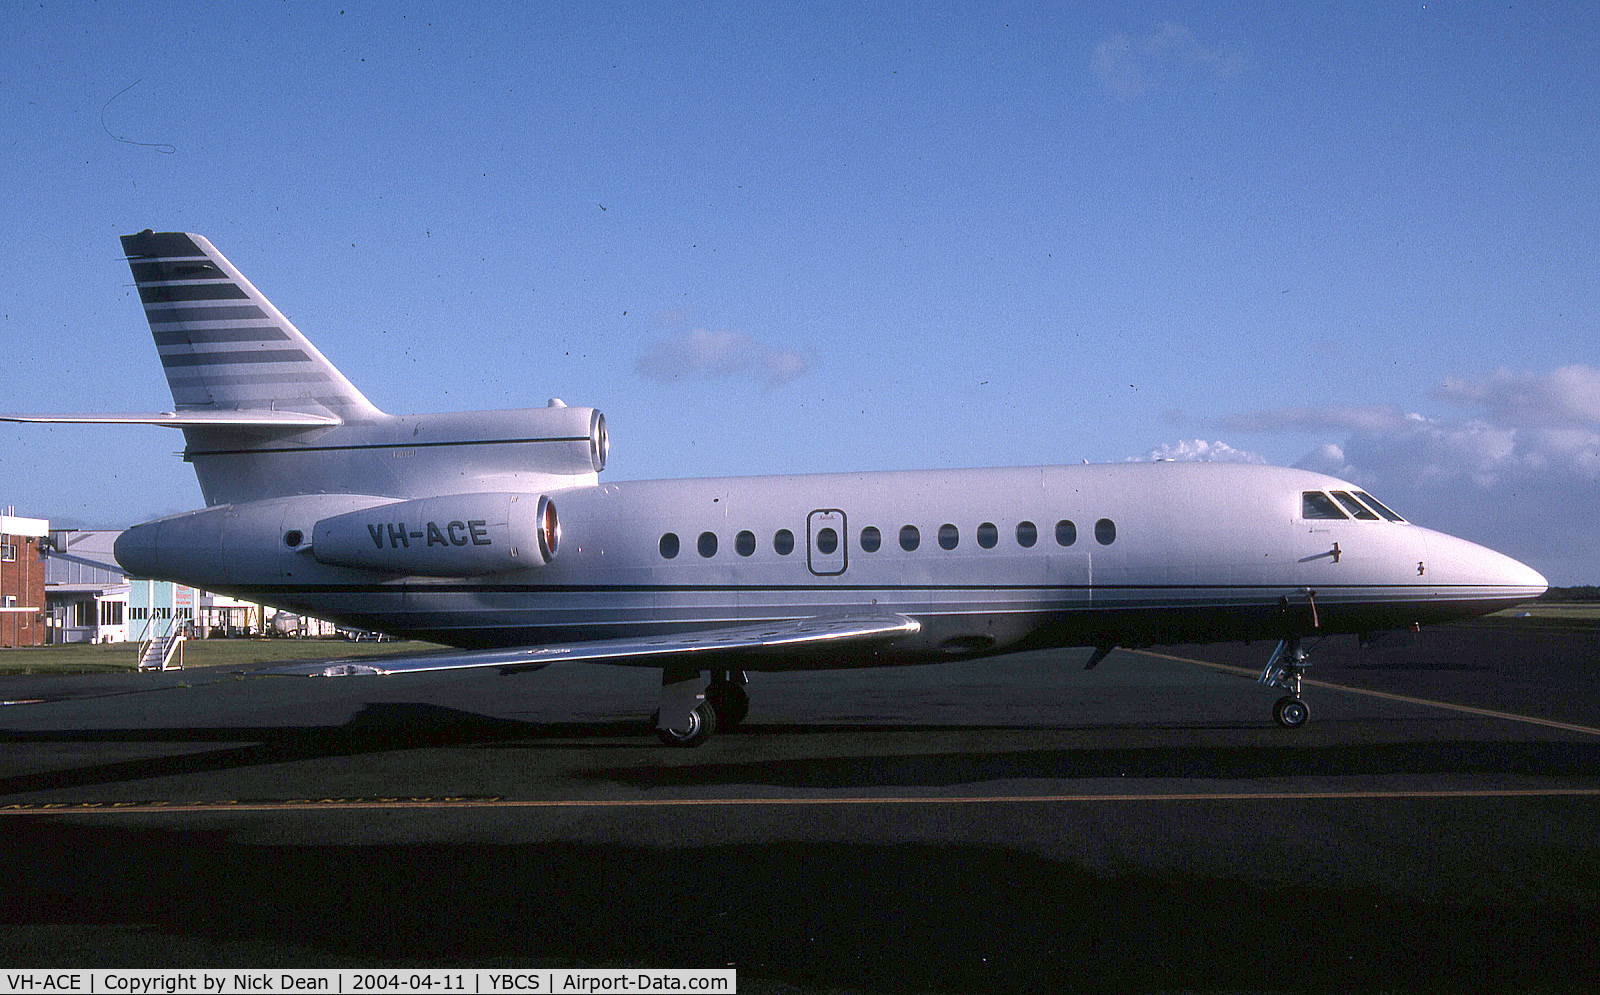 VH-ACE, 1988 Dassault-Breguet Falcon (Mystere) 900 C/N 37, Very early morning Sun at YBCS